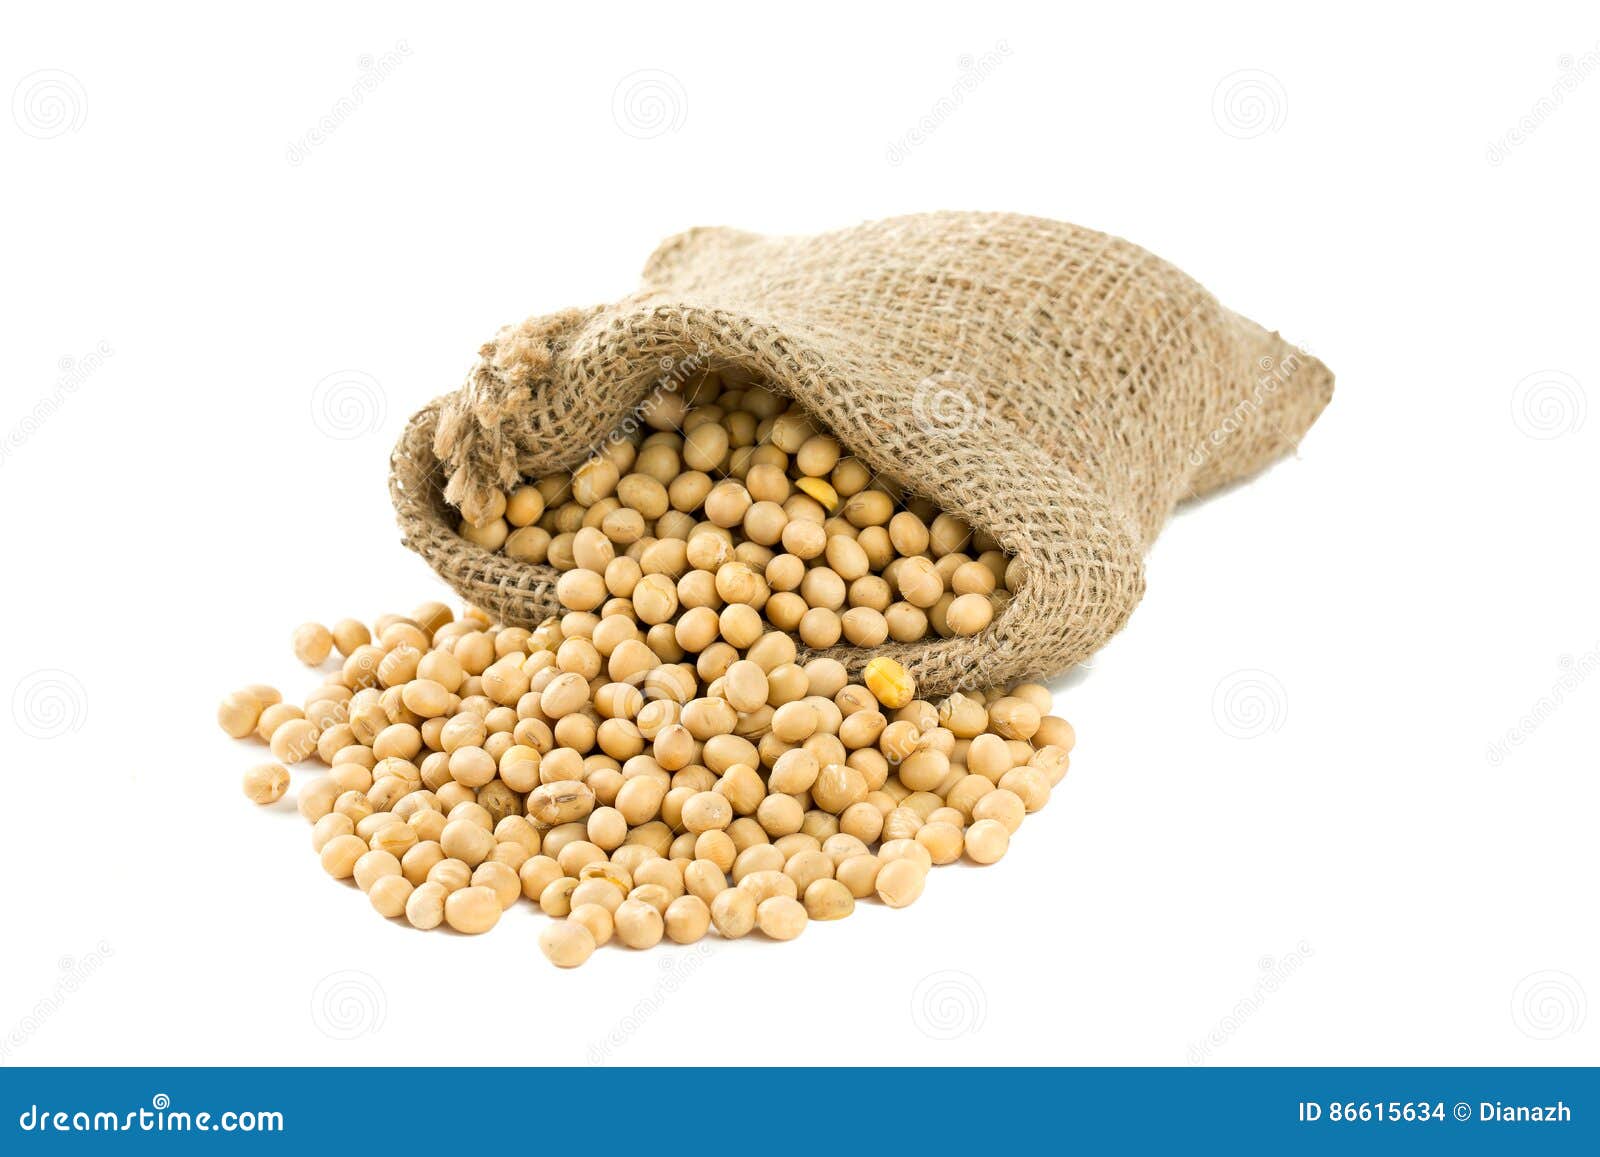 8 Surprising Soybean Protein Benefits for Women – Saturn by GHC